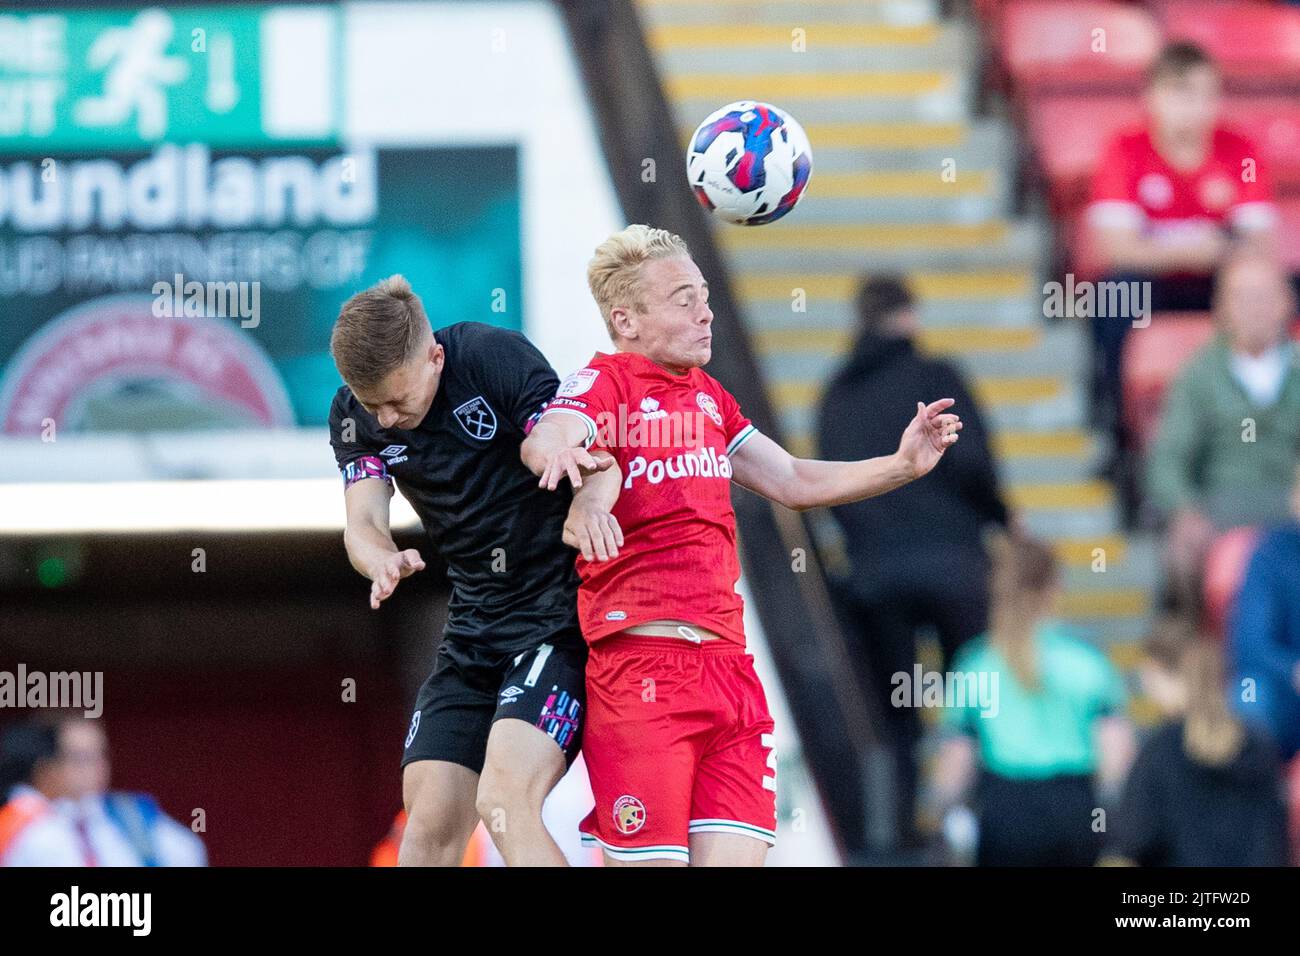 Regan Clayton of West Ham U-21 and Walsall«s Liam Bennett battle for the ball during the EFL Trophy match between Walsall and West Ham United at the Banks's Stadium, Walsall on Tuesday 30th August 2022. (Credit: Gustavo Pantano | MI News) Credit: MI News & Sport /Alamy Live News Stock Photo